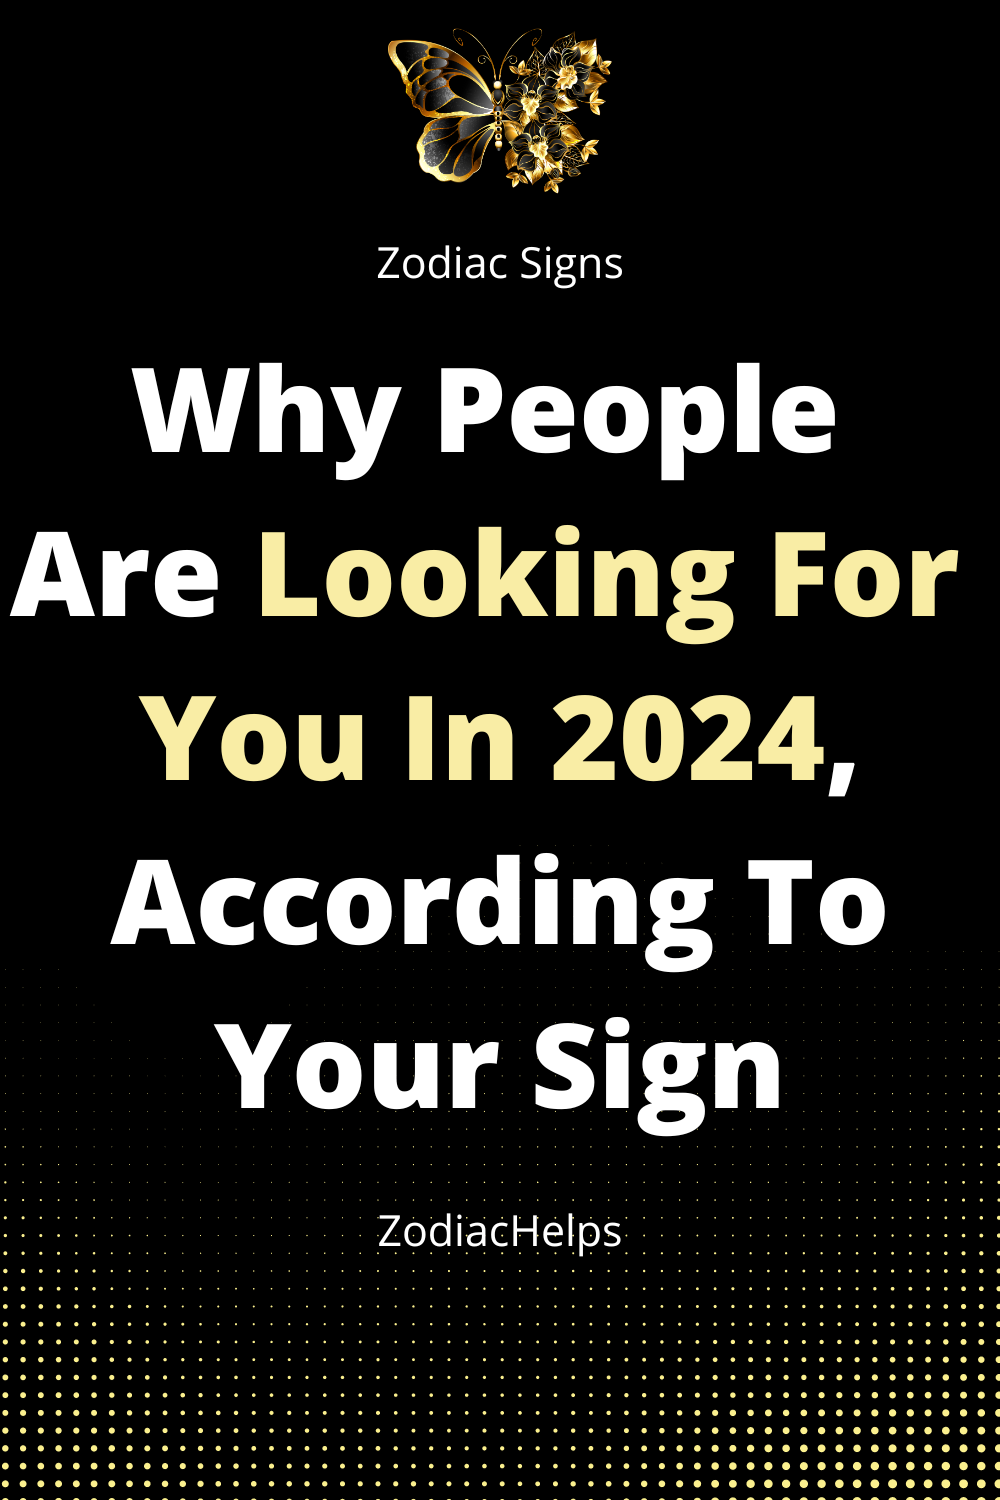 Why People Are Looking For You In 2024, According To Your Sign